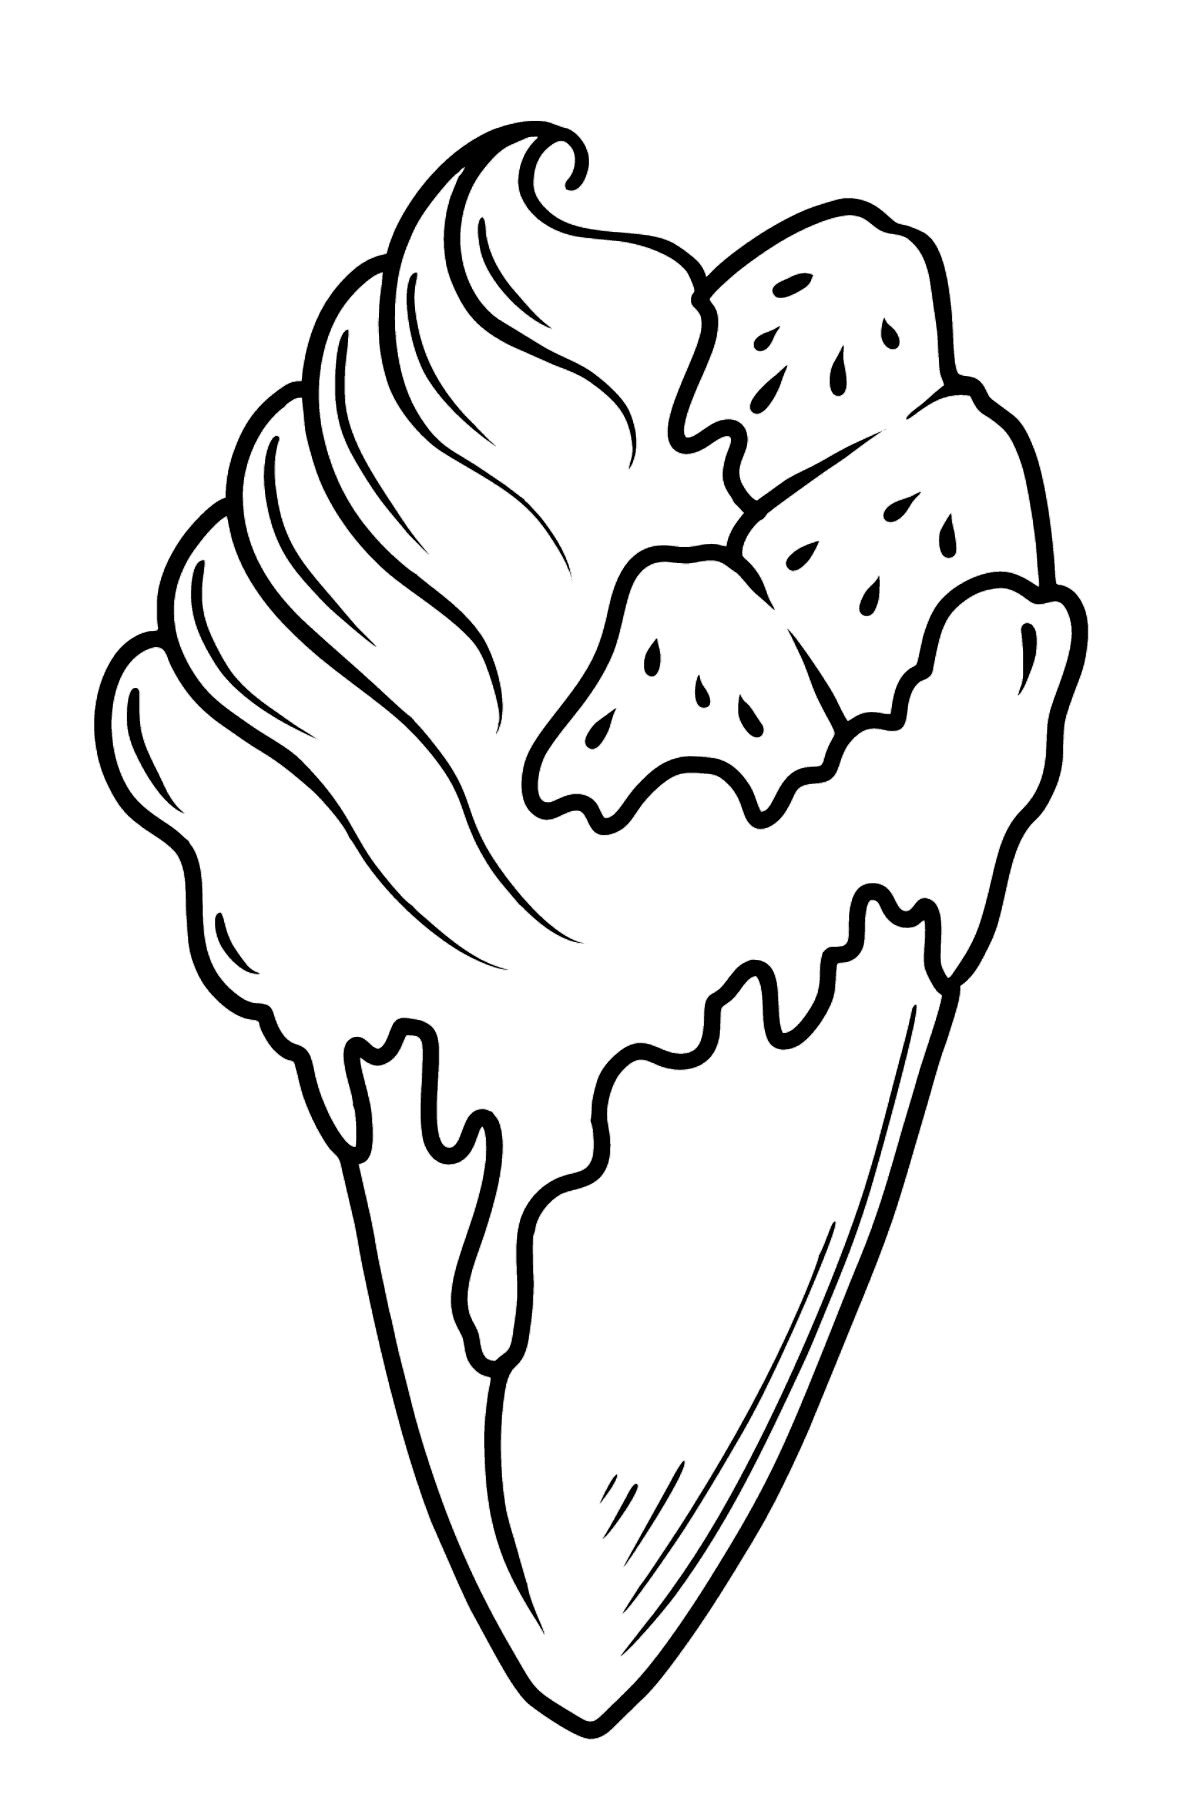 Banana Ice Cream and Jam Cone coloring page - Coloring Pages for Kids